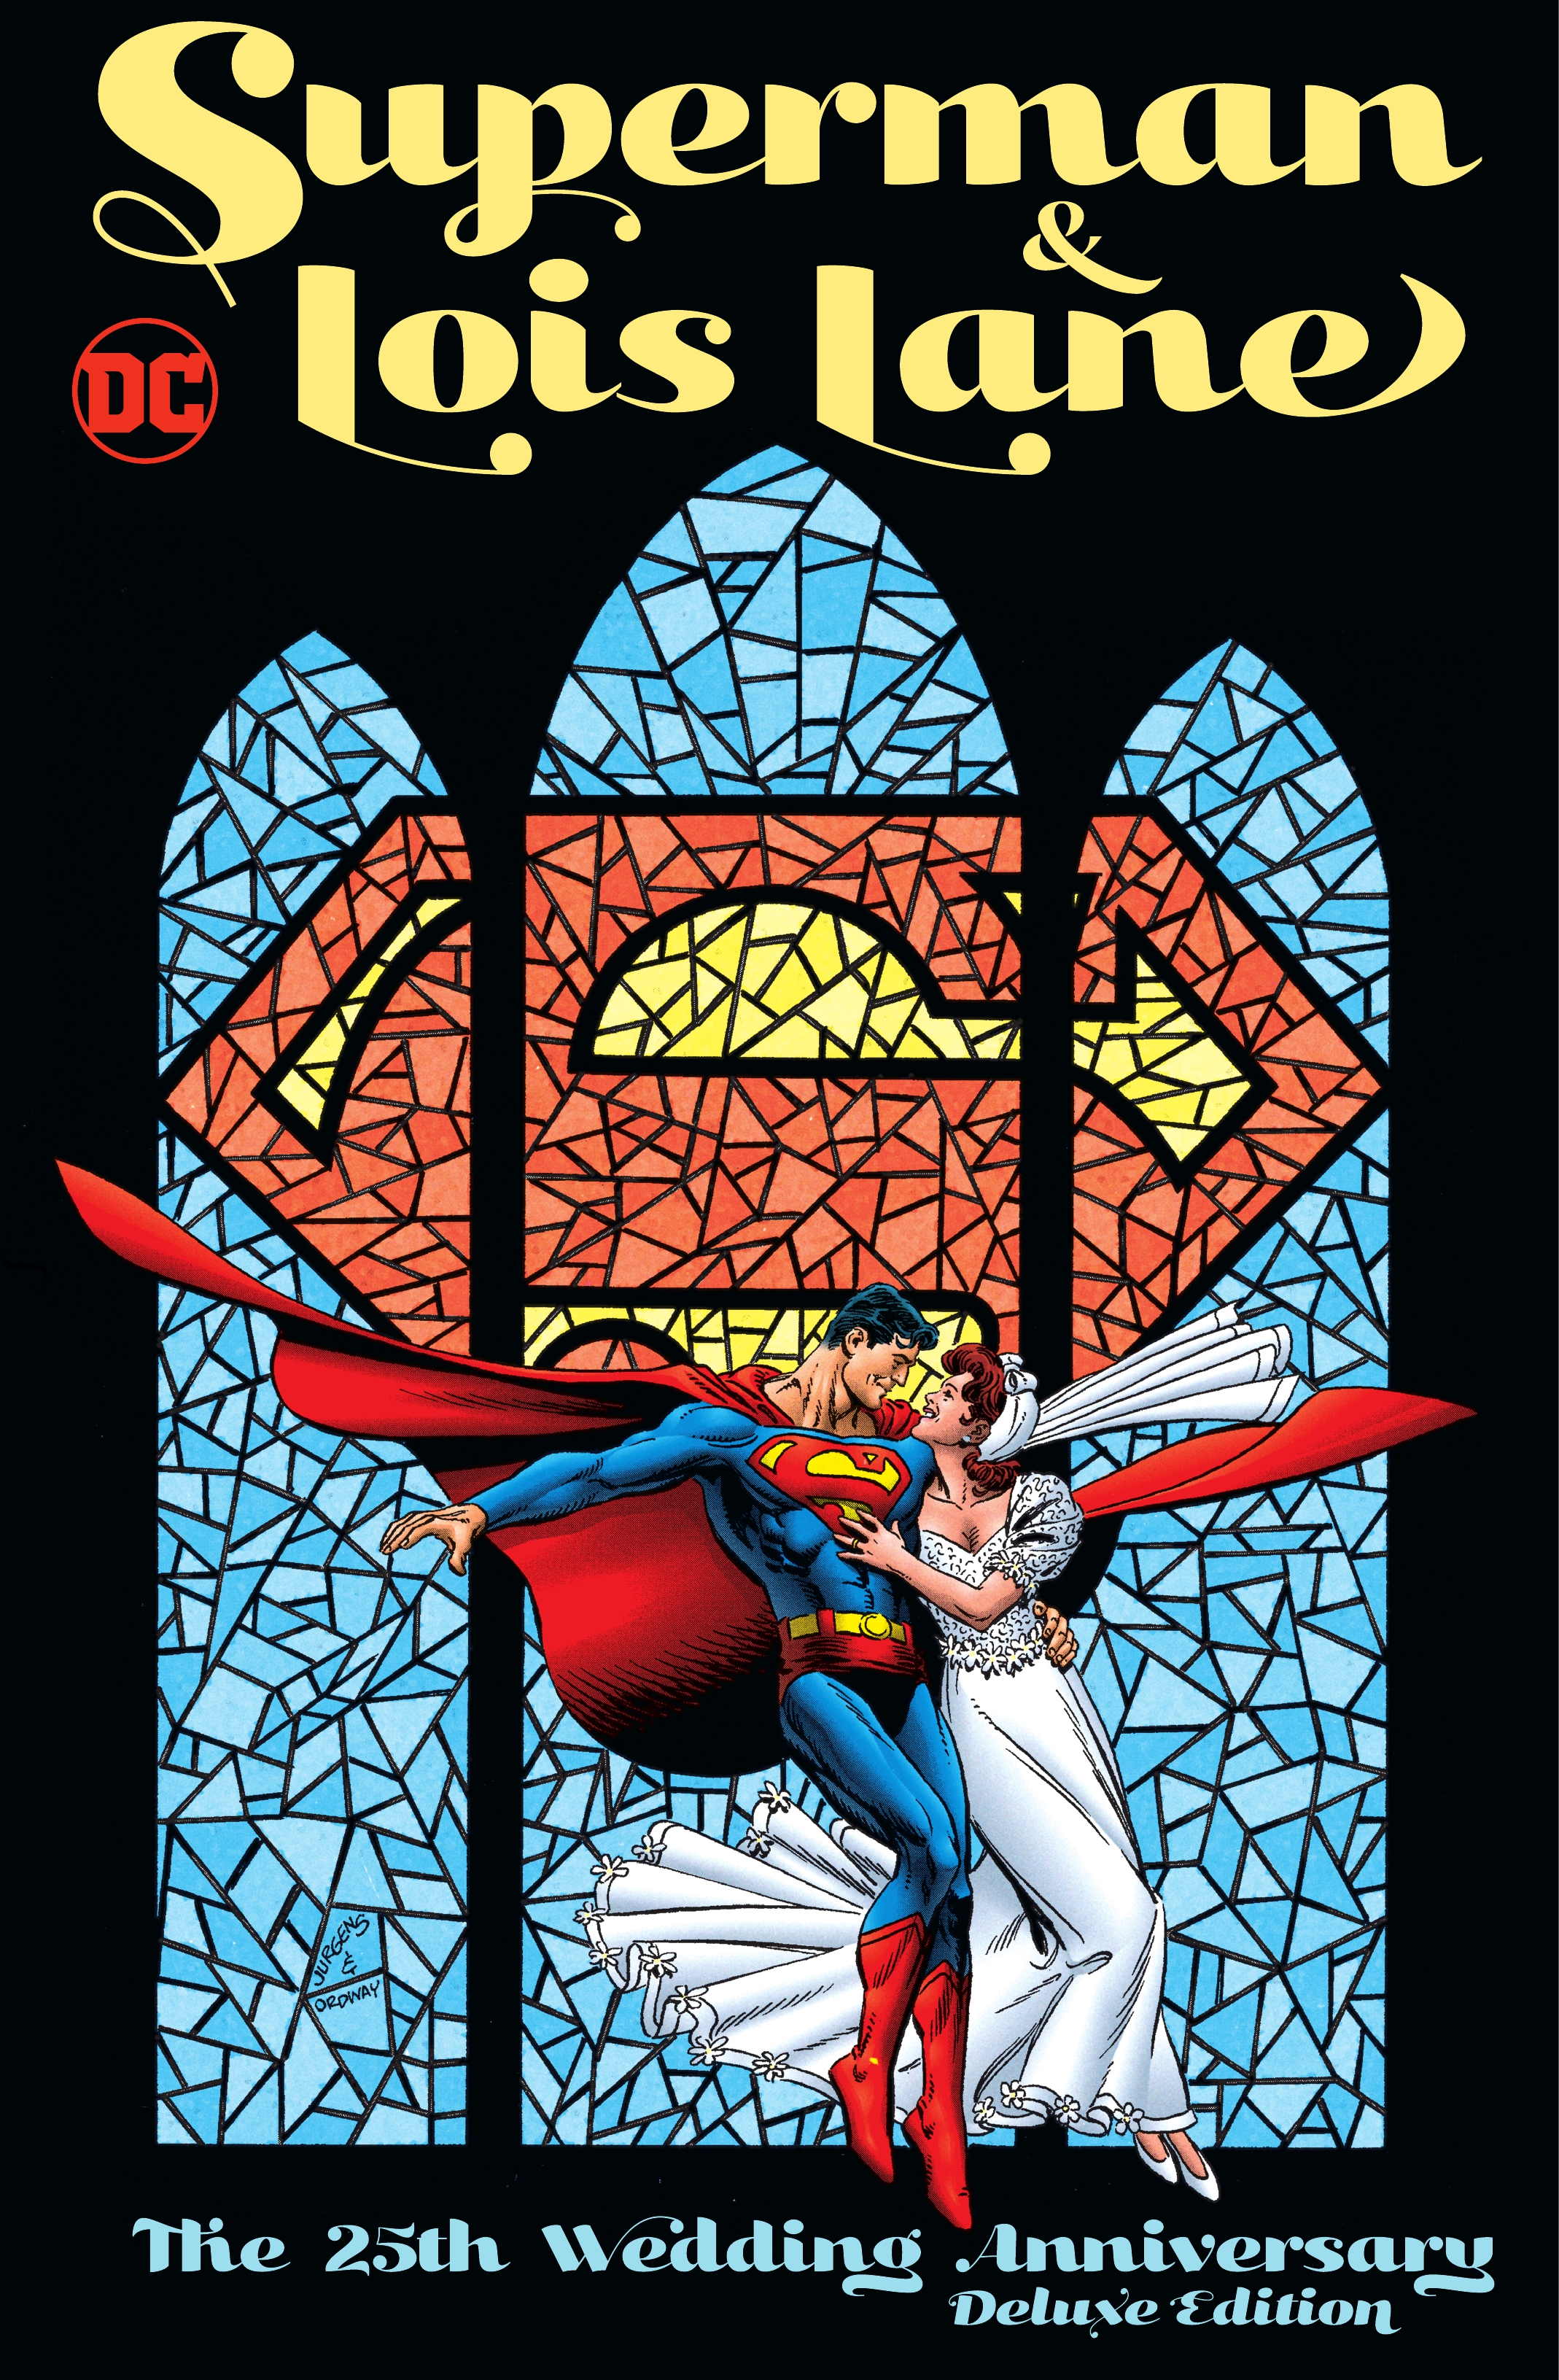 Read online Superman & Lois Lane: The 25th Wedding Anniversary Deluxe Edition comic -  Issue # TPB (Part 1) - 1